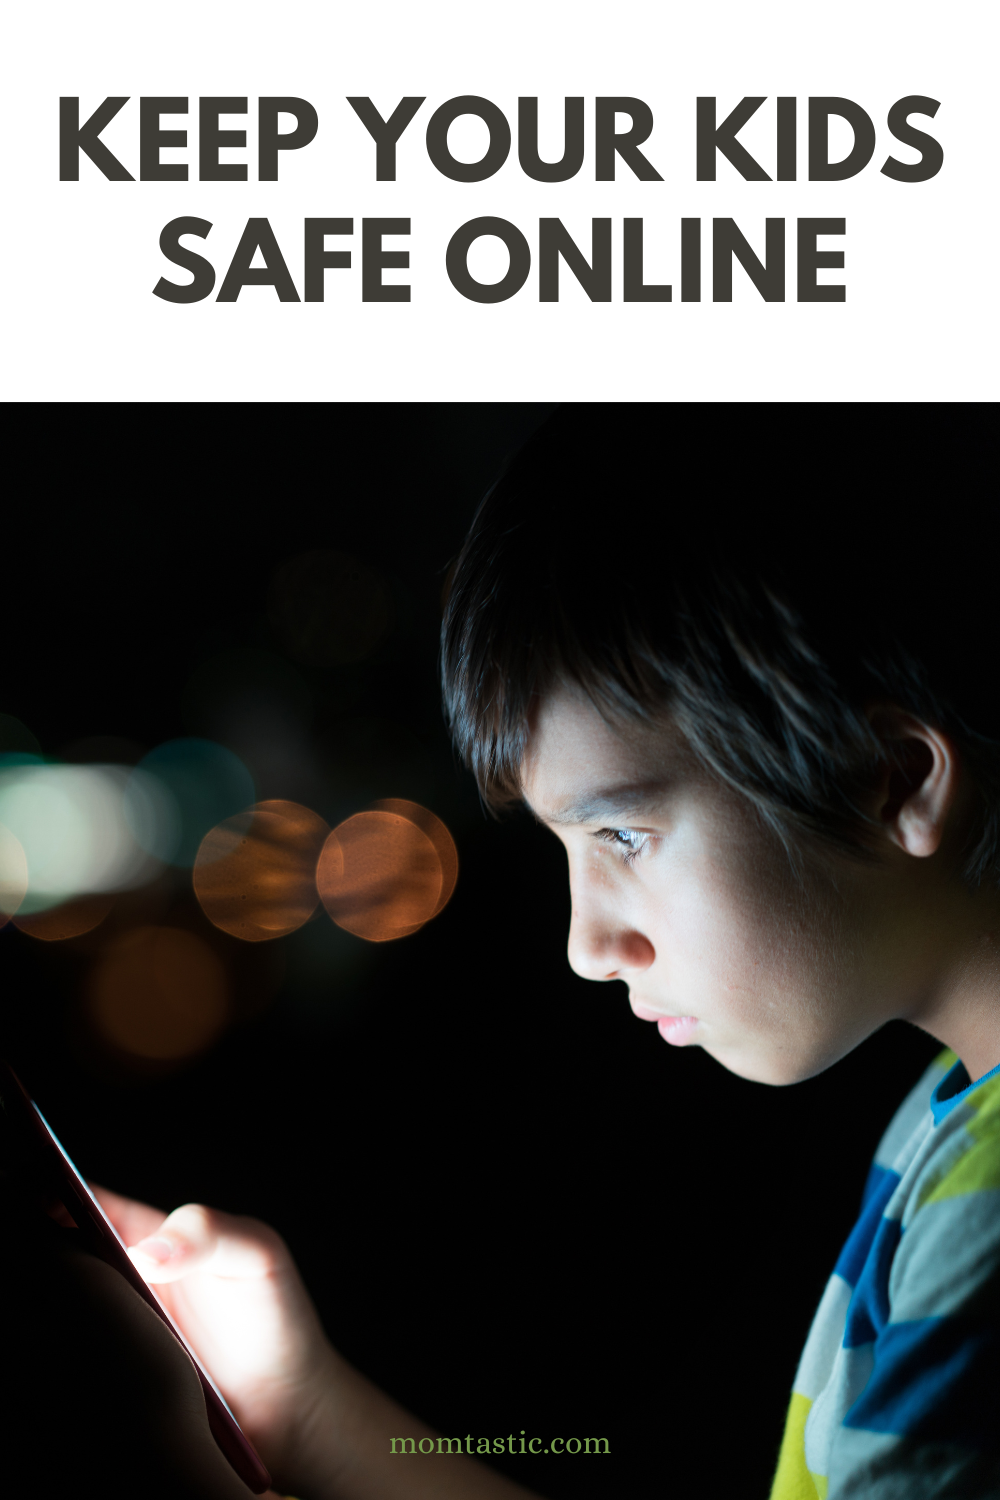 Keep Kids Safe Online - Kid with cell phone